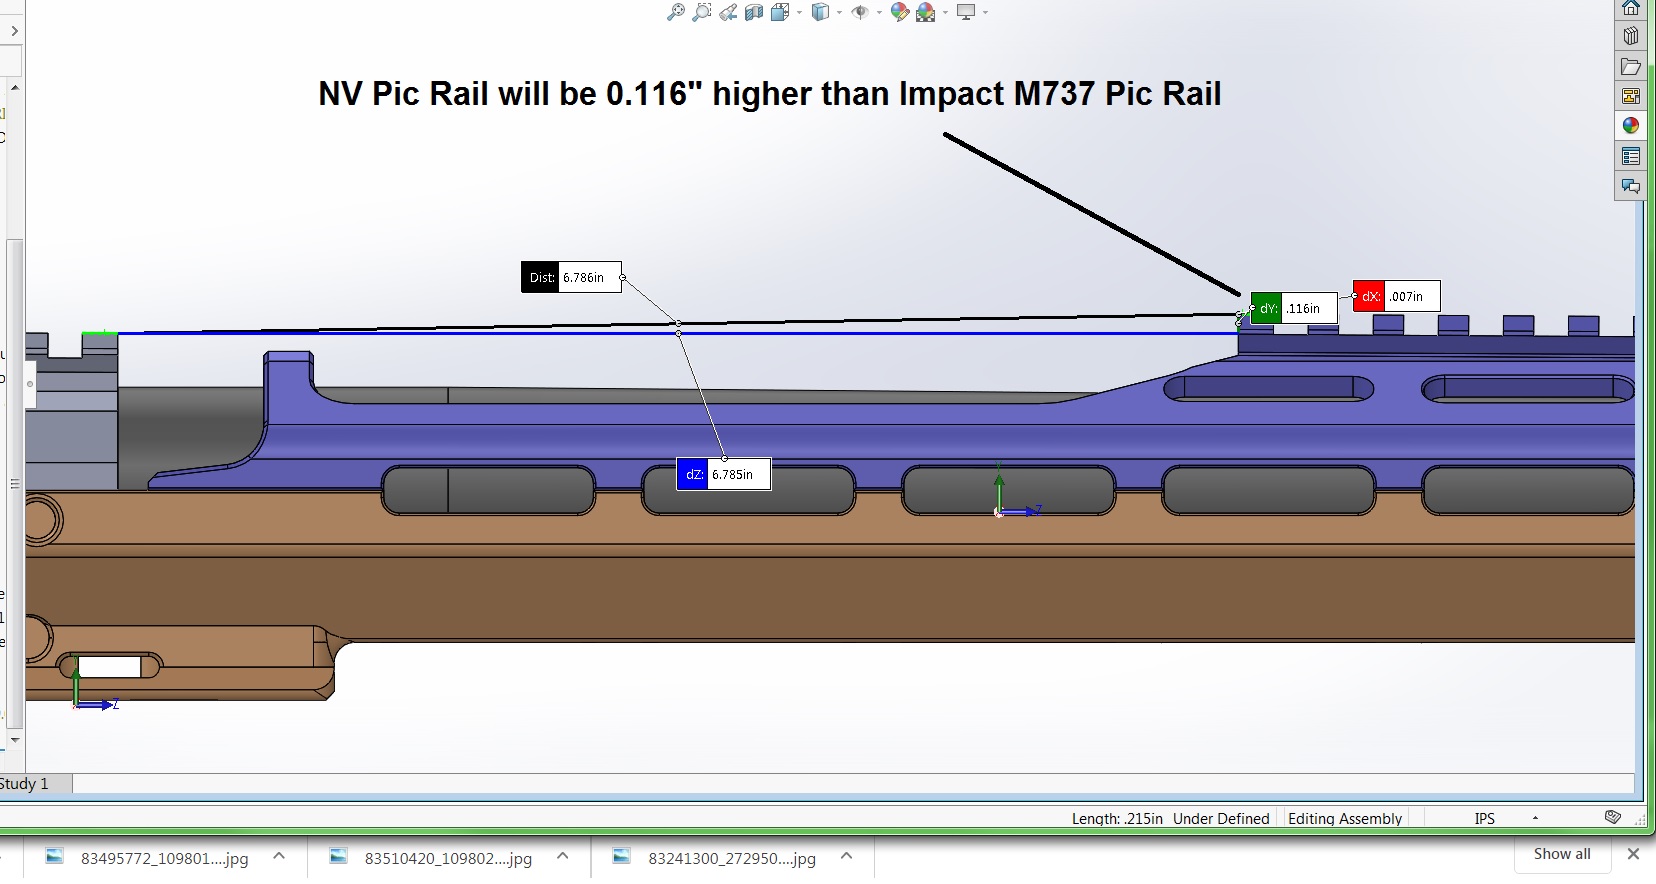 Detail on NV rail height compared to Action Pic Rail  Jan 29, 2020.jpg